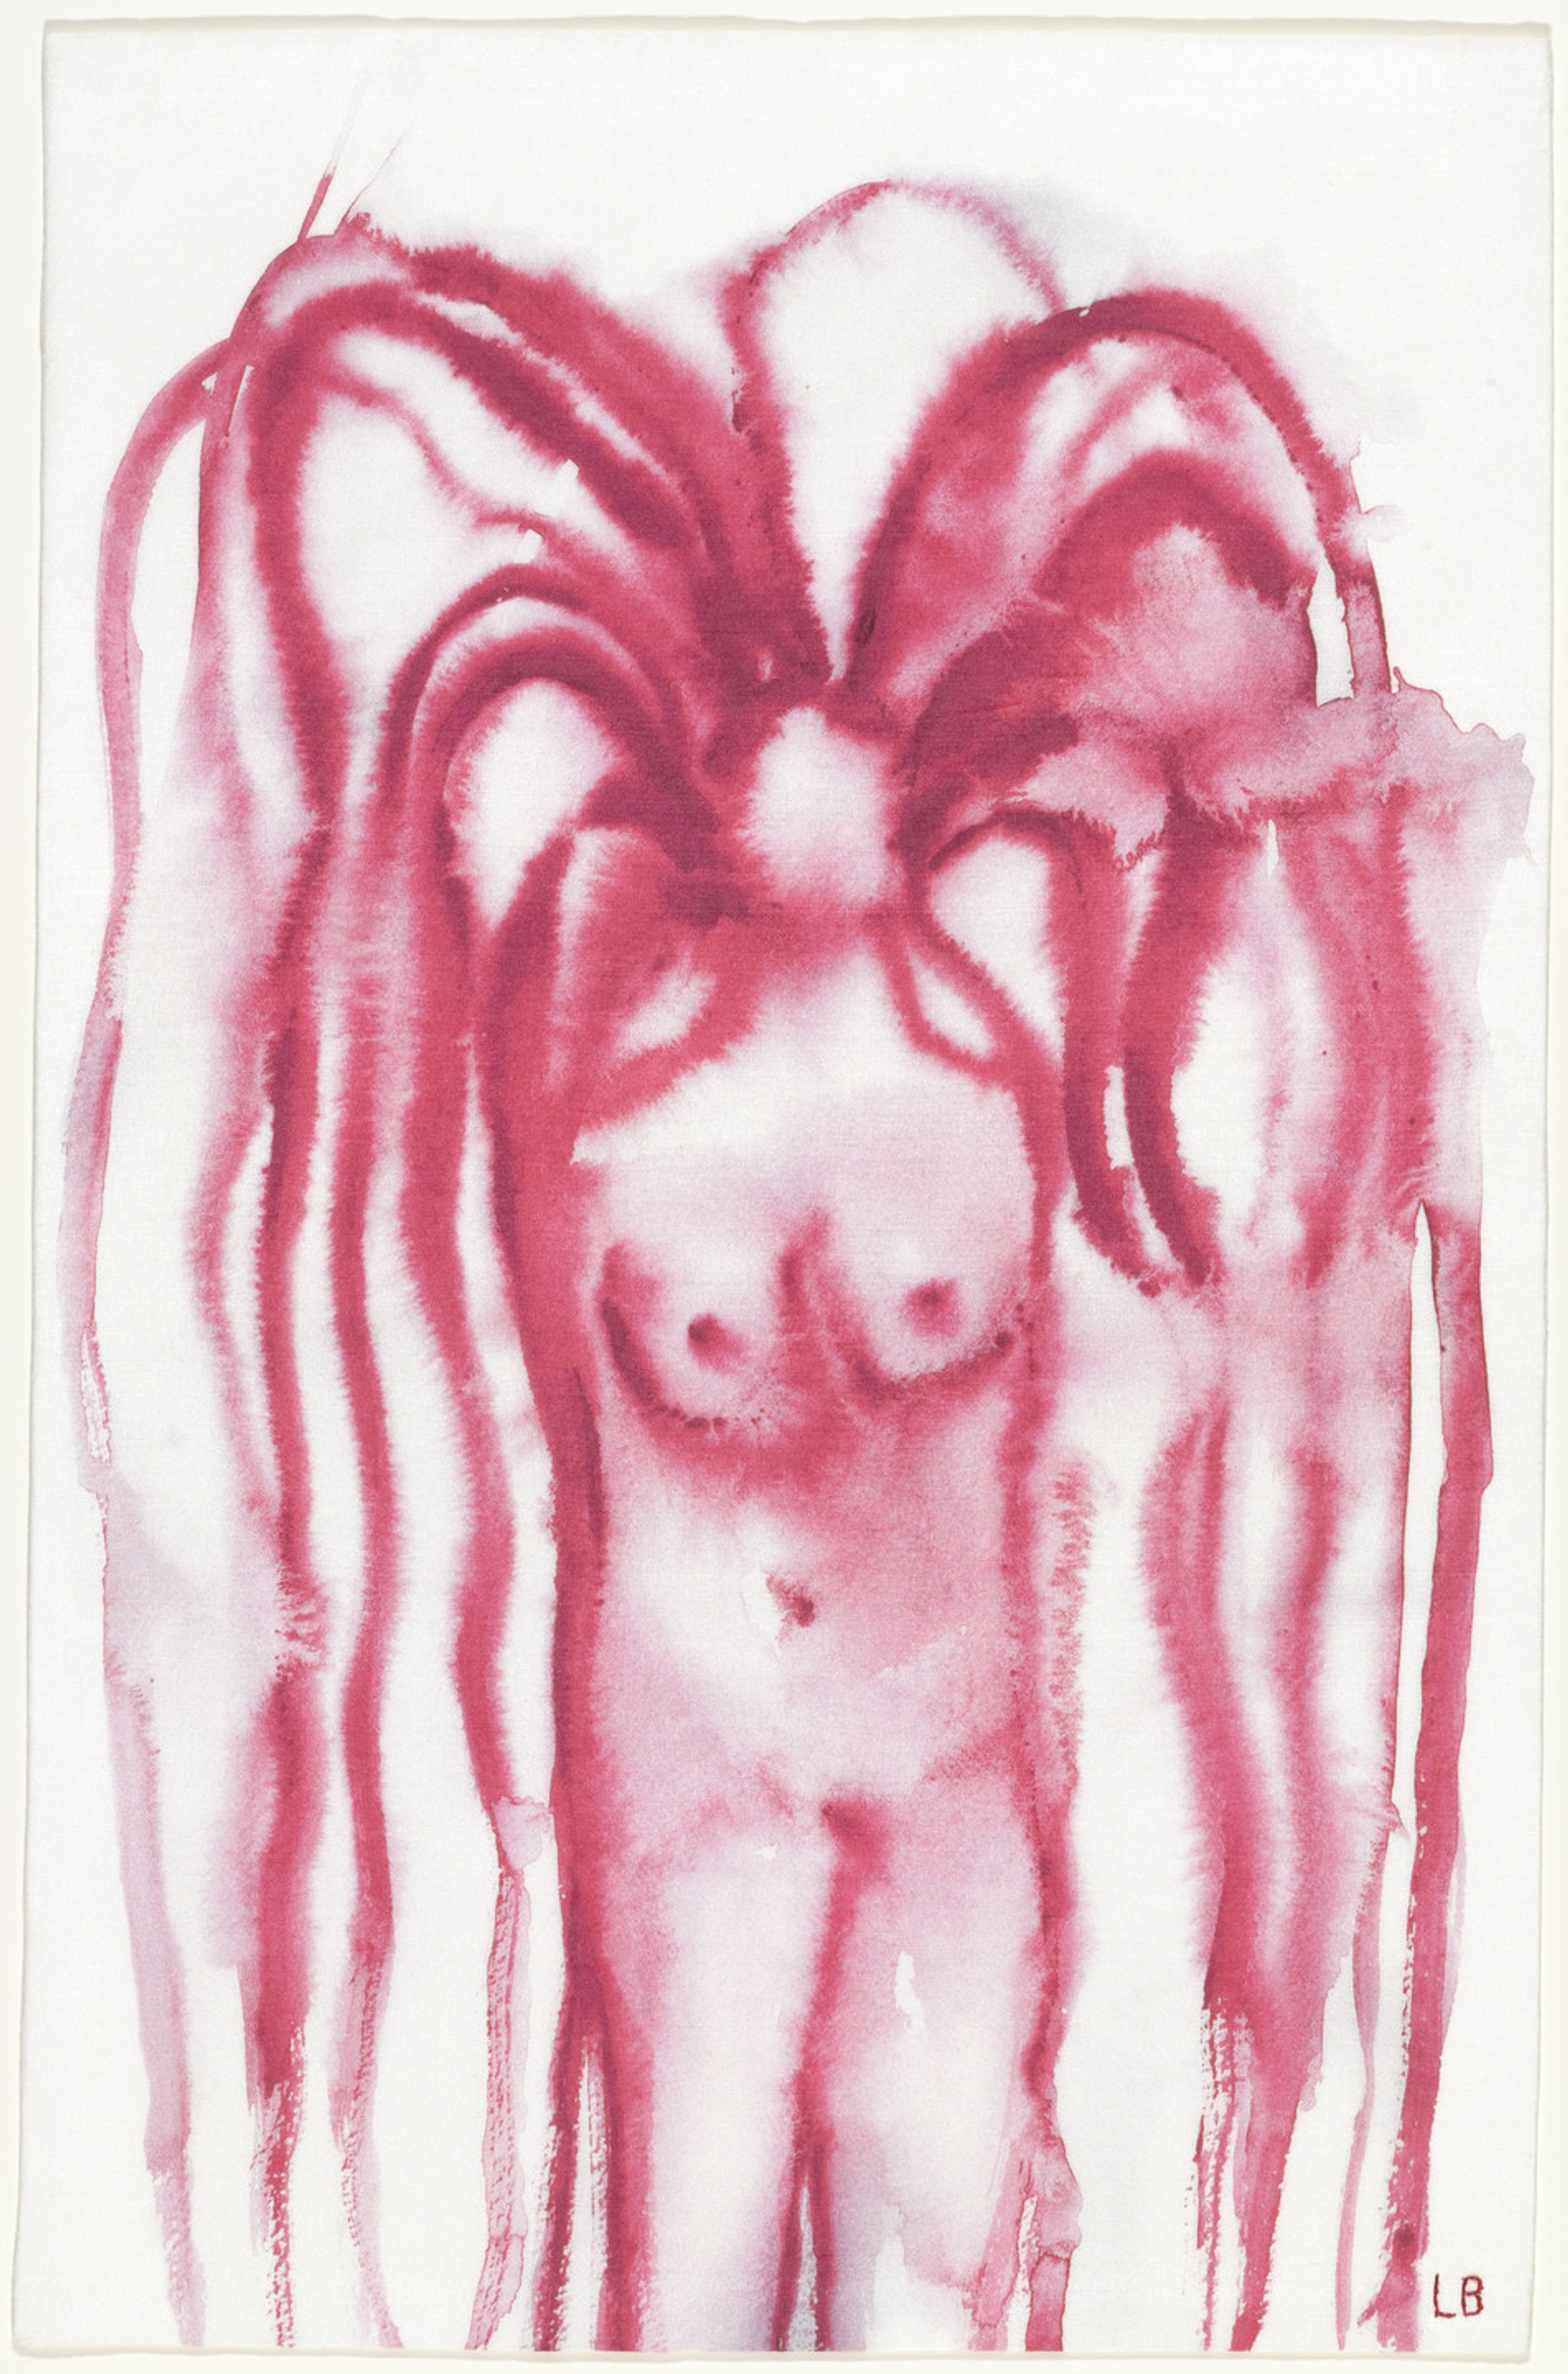 A print of Louise Bourgeois’ Girl With Hair. A nude woman’s figure with strands of hair that stands up and away from the face, long enough to cover the woman’s length of her body. She is painted with a monochromatic style in the colour red.